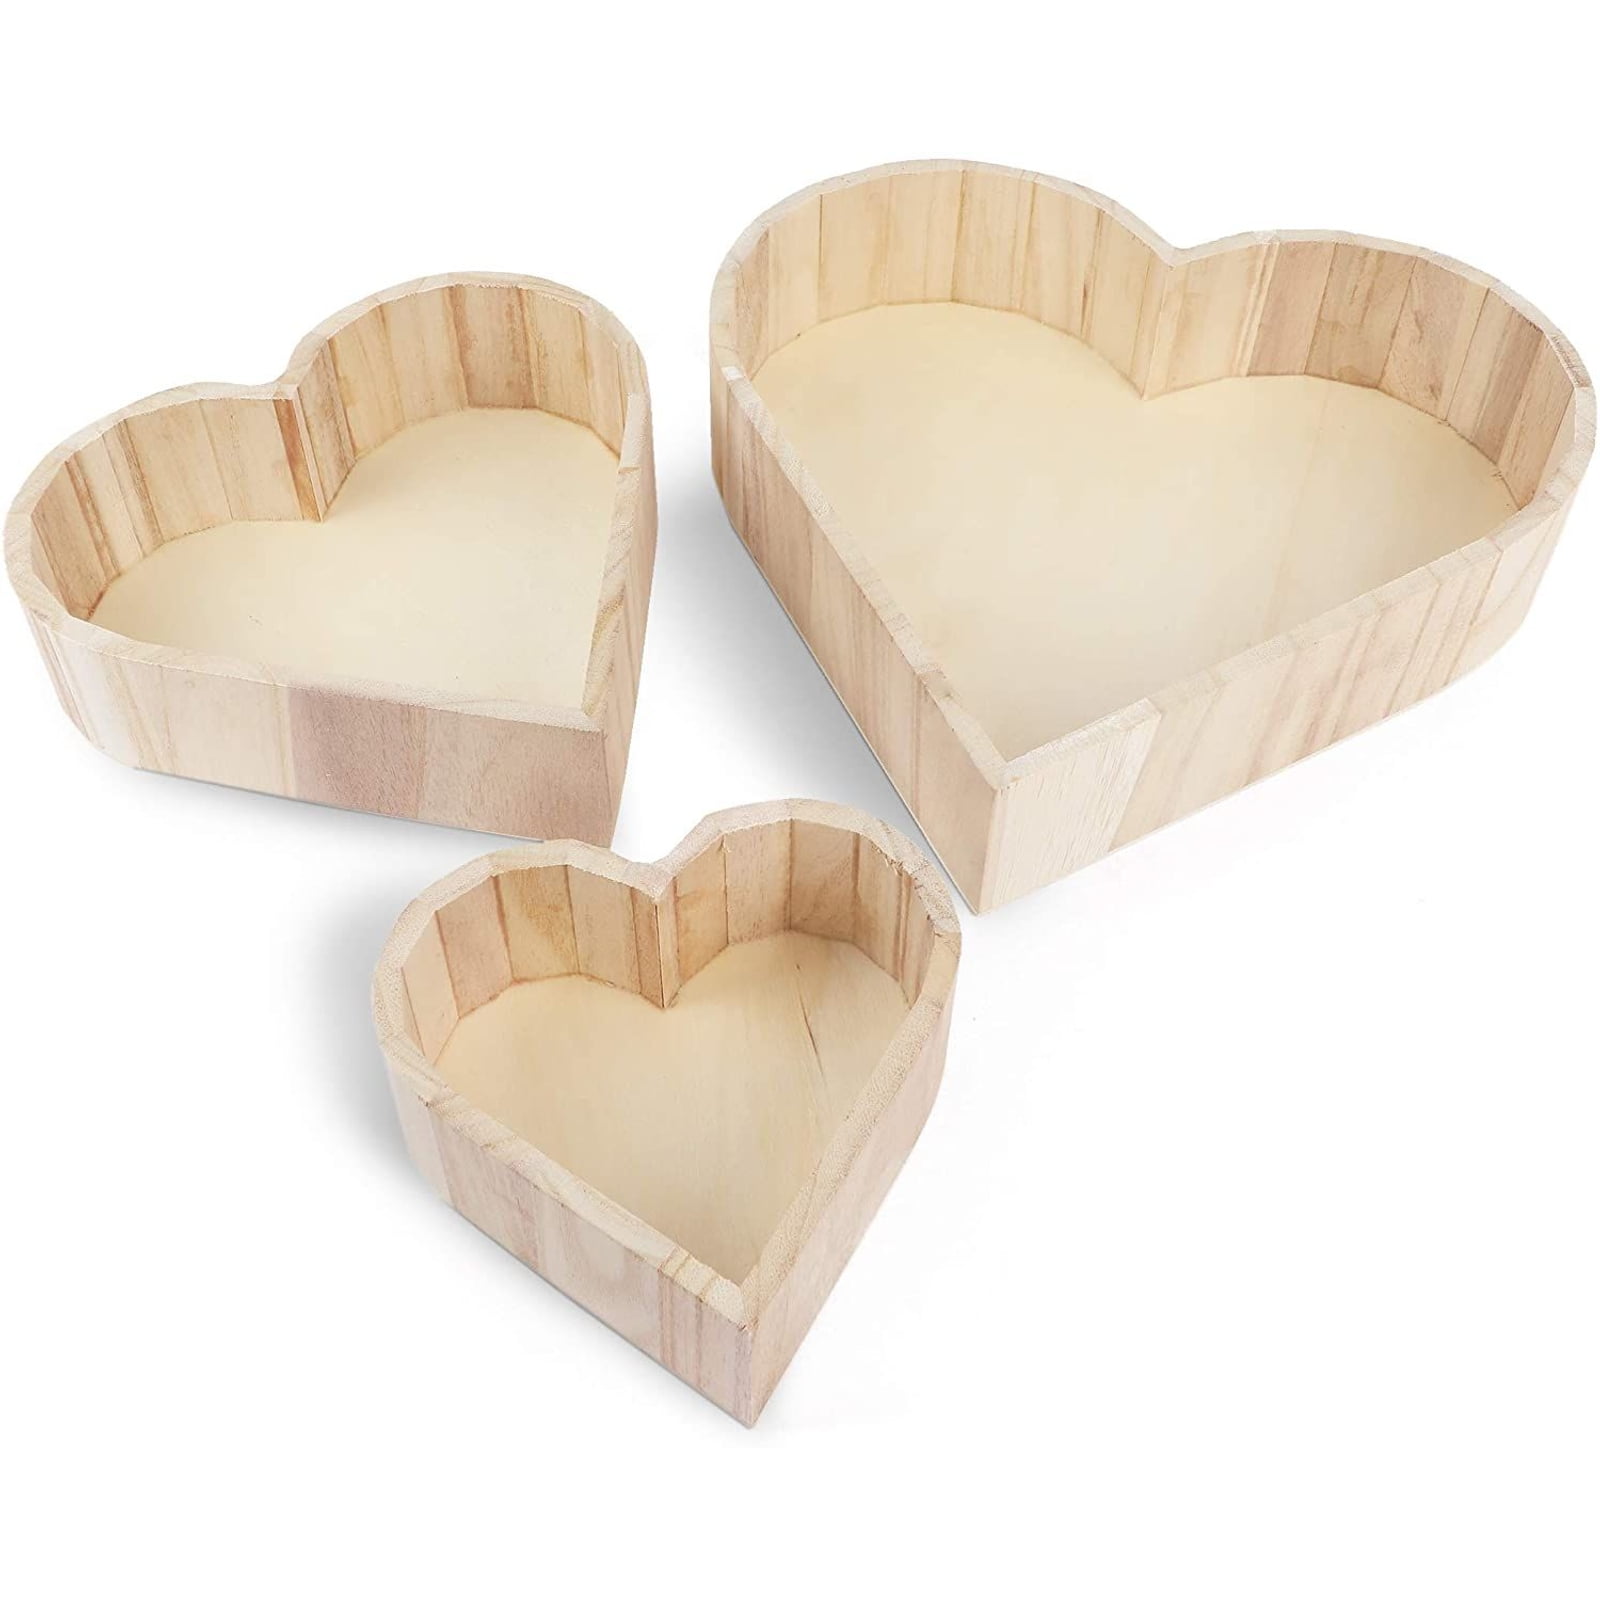 Sweet gift wooden HEART solid hard wood plain blank HOME DECORATION any size 